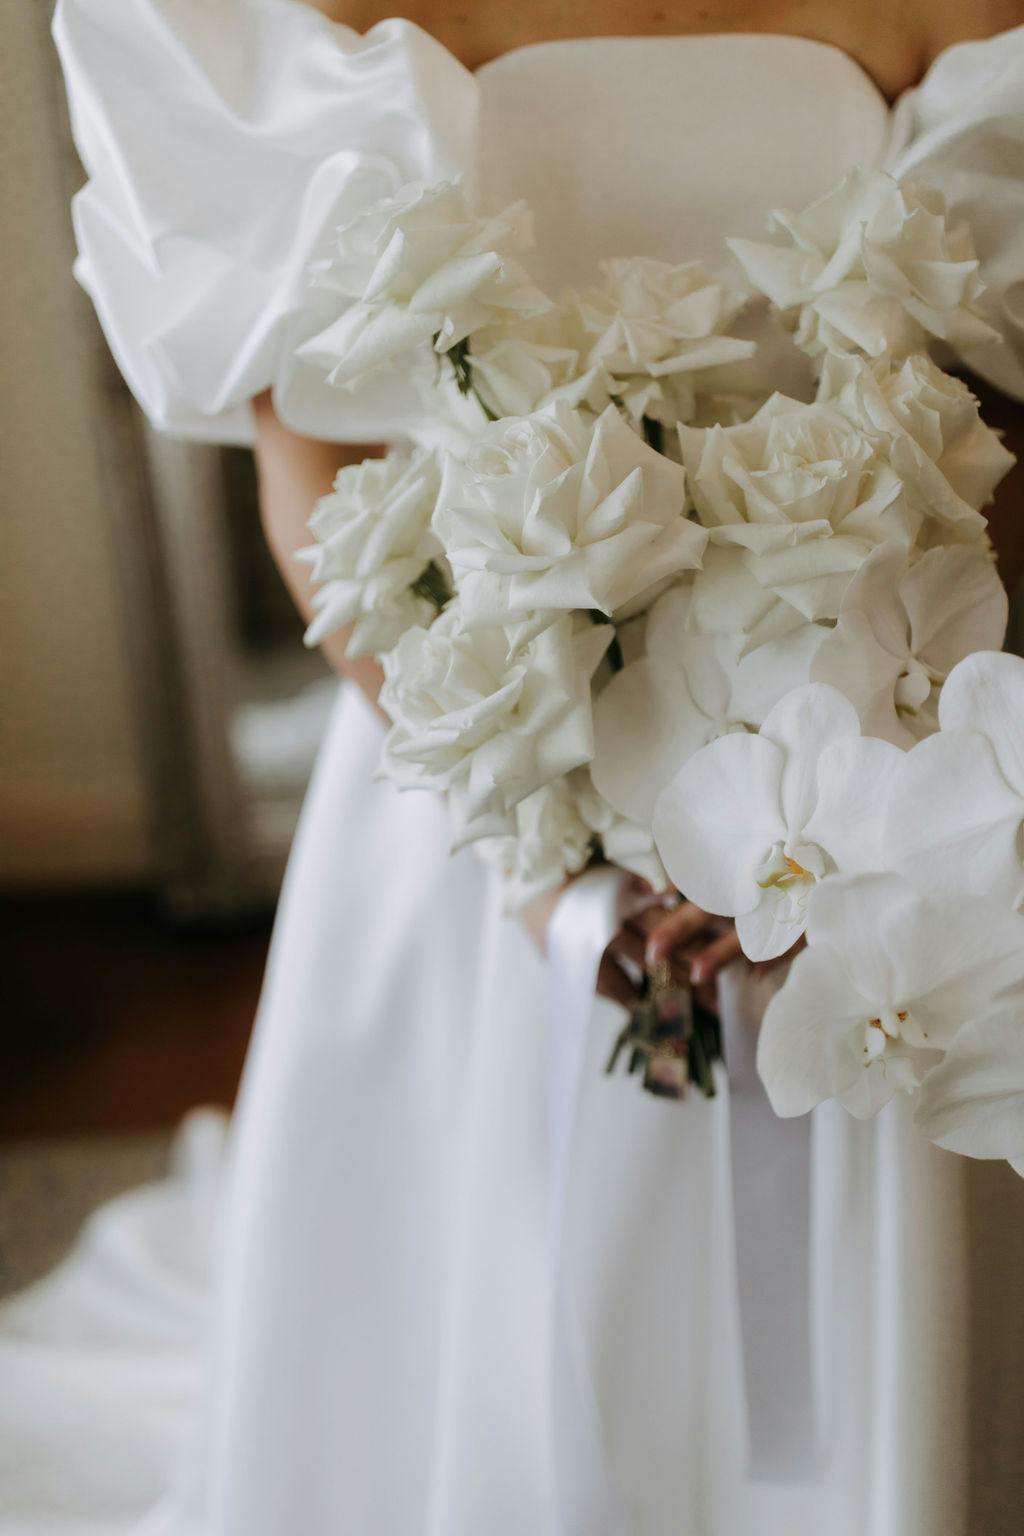 A bride in a white gown holds a bouquet of white roses and orchids, with puffed sleeves of her dress visible. The background is softly blurred, focusing the attention on the flowers and the fabric details of the dress.